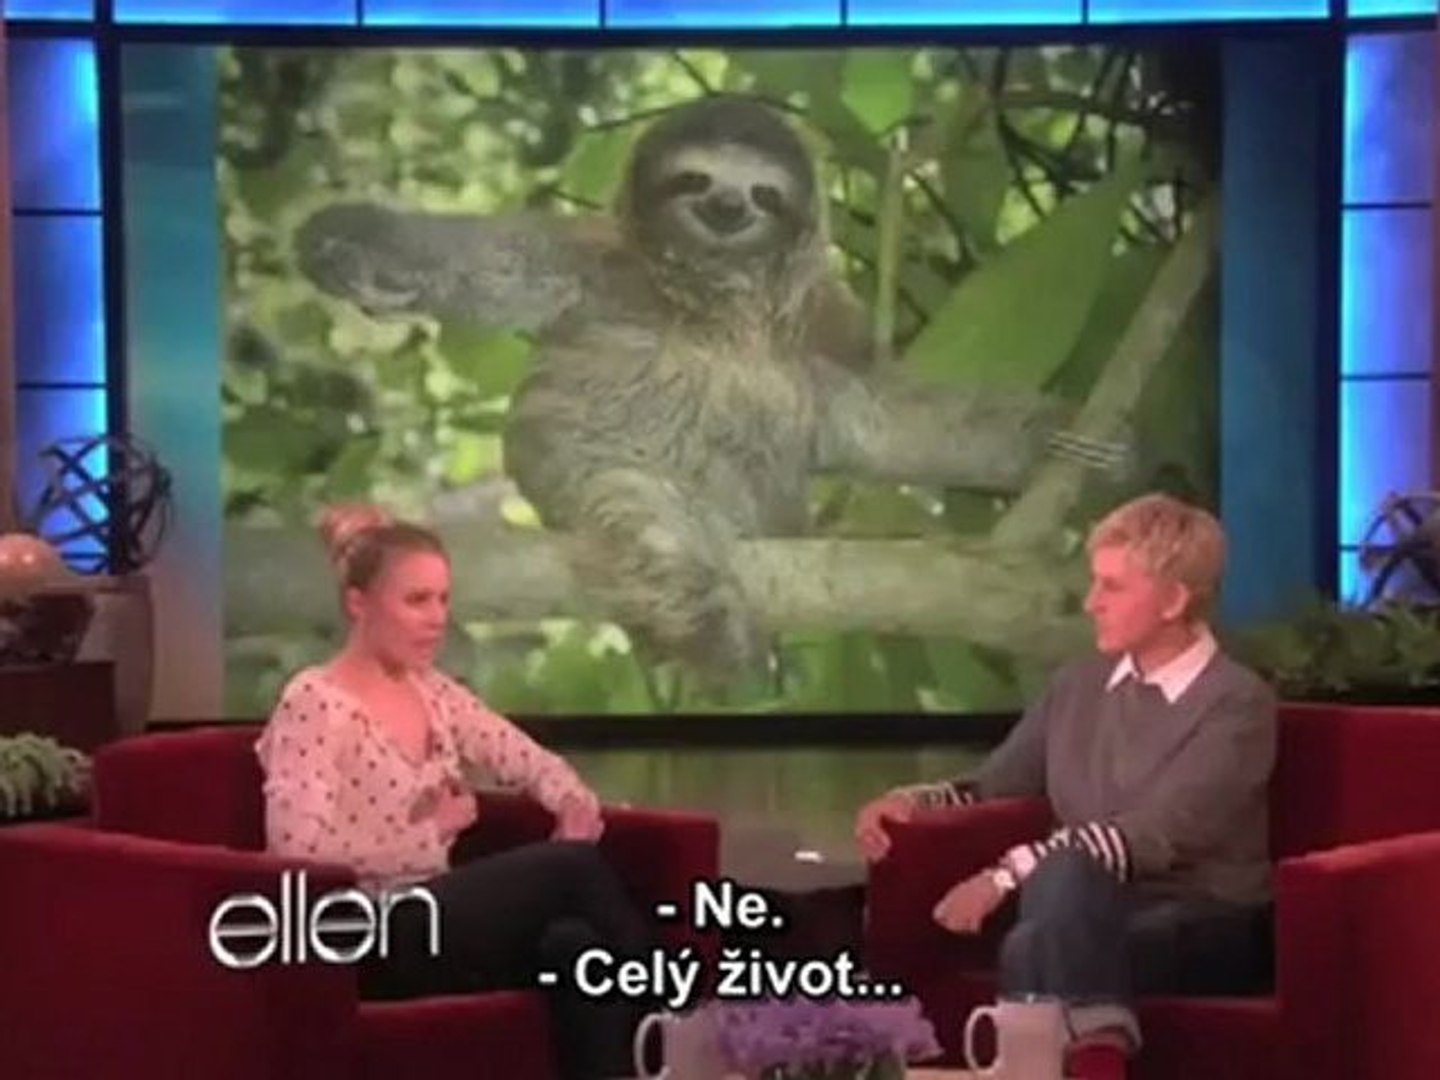 Kristen Bell's Sloth Gets Auto tuned!_arc